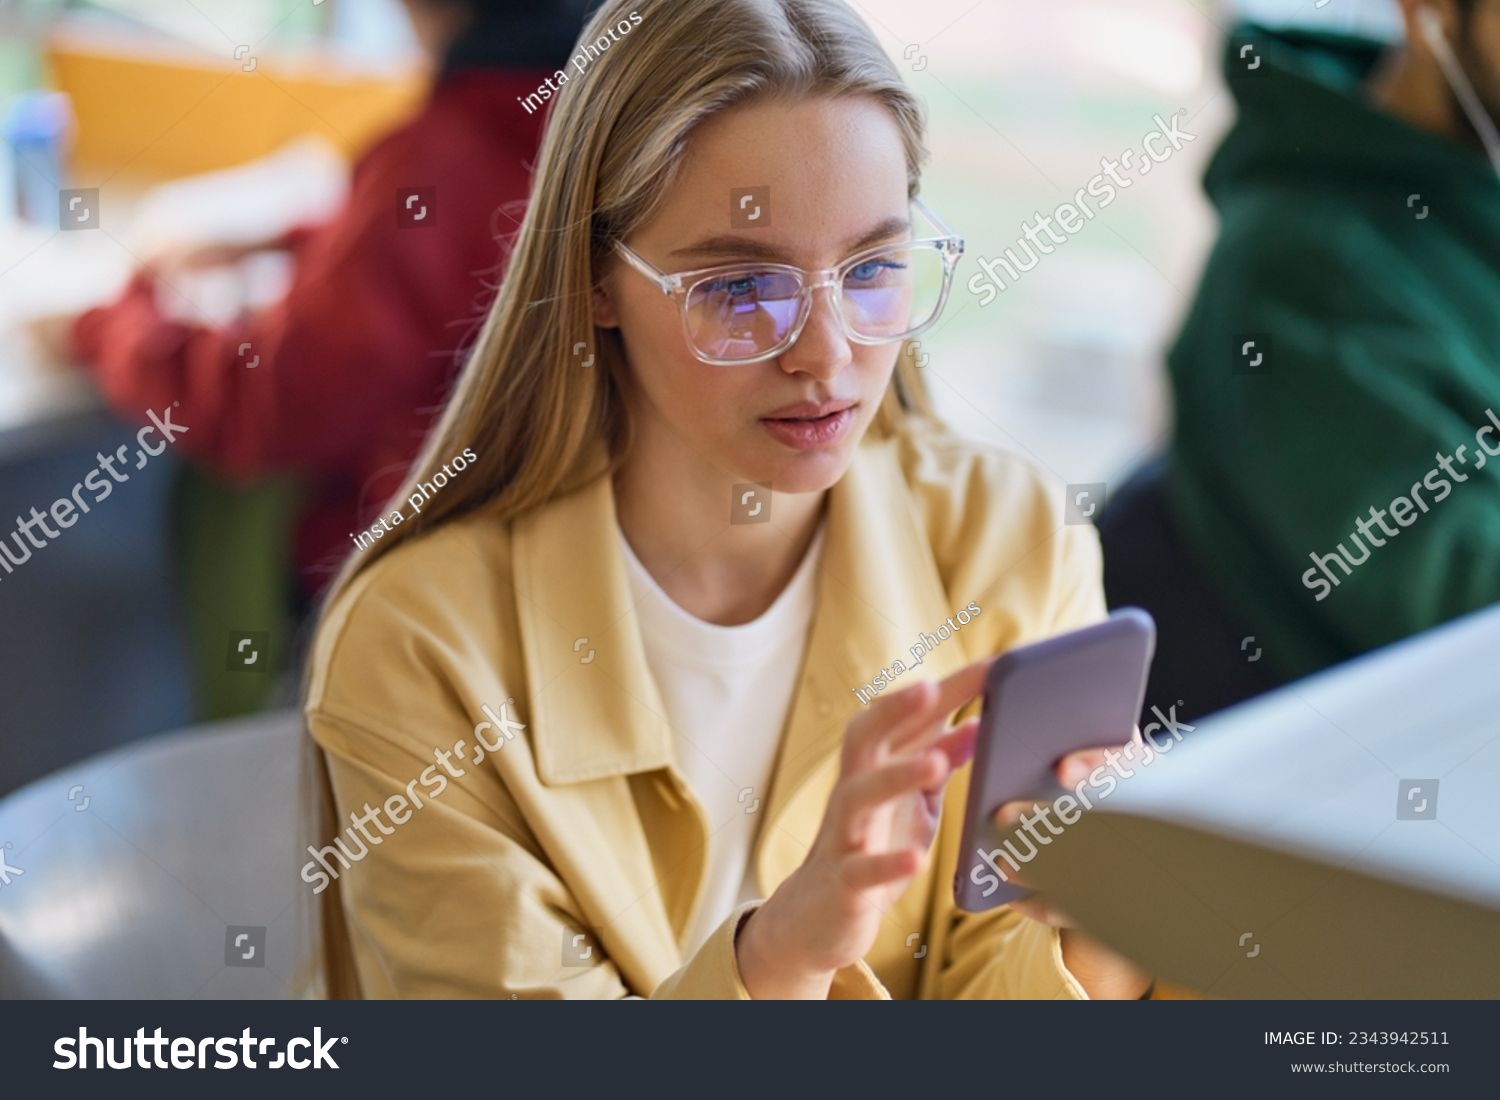 Teen girl gen z student using mobile phone looking at smartphone sitting at desk in university college campus classroom. Young blonde woman holding cellphone modern tech in university. #2343942511